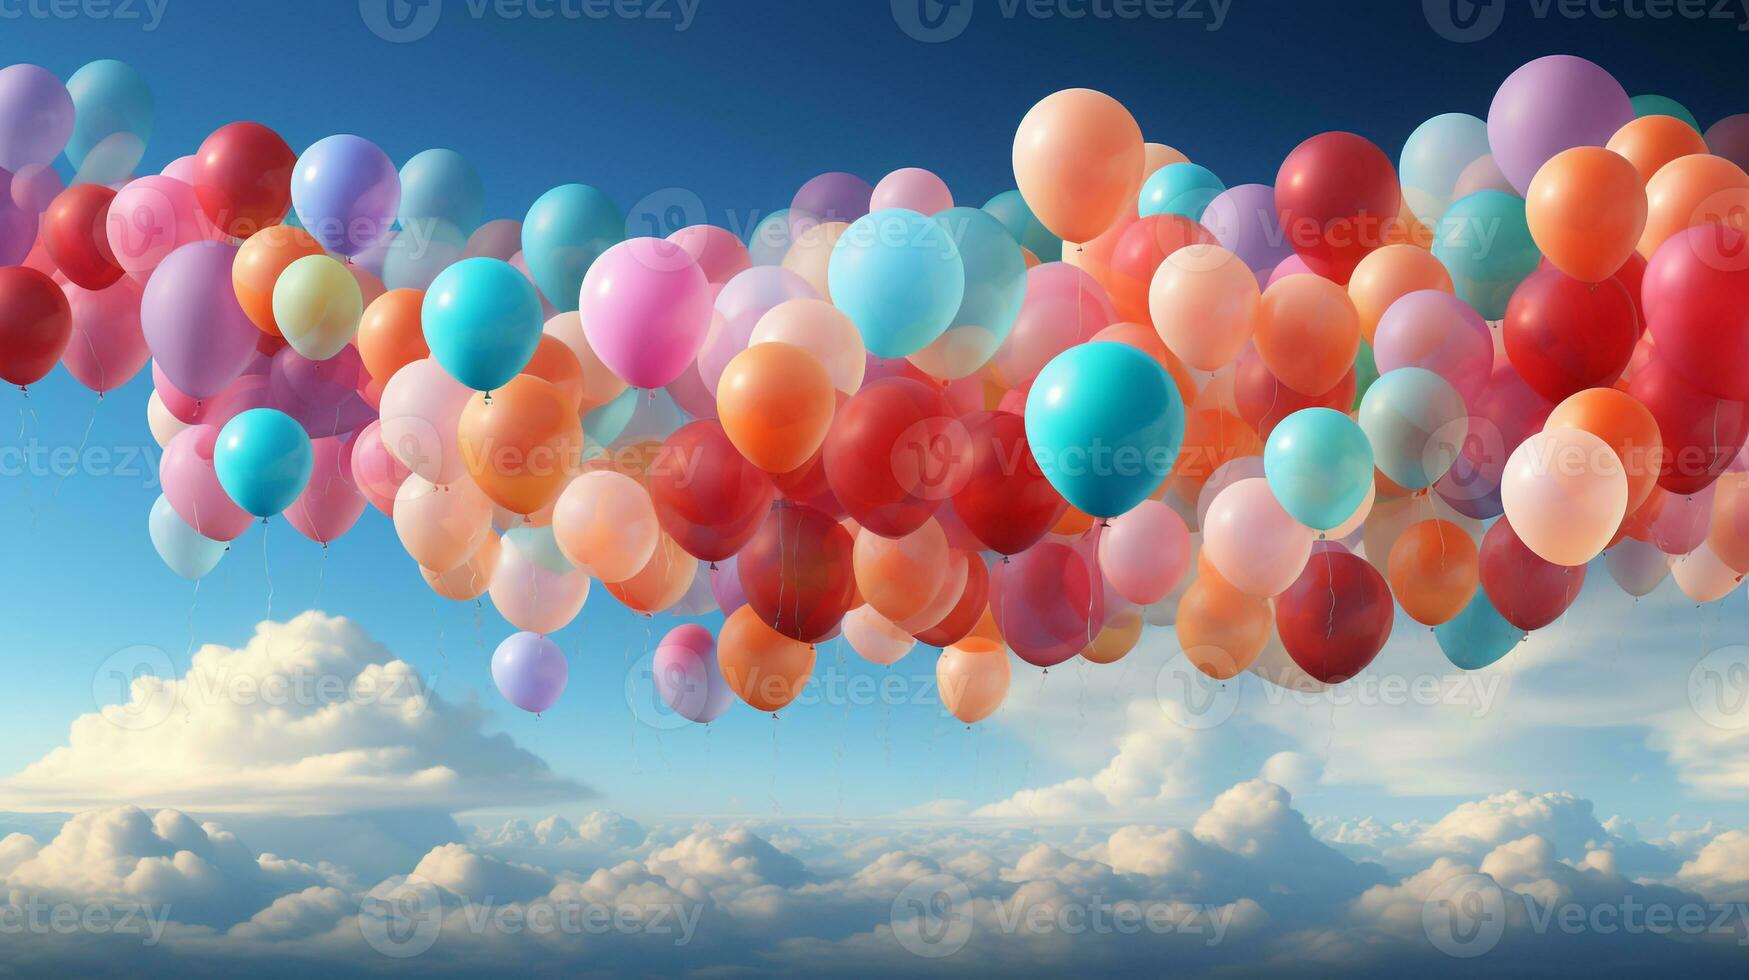 Background lots of colorful balloons photo